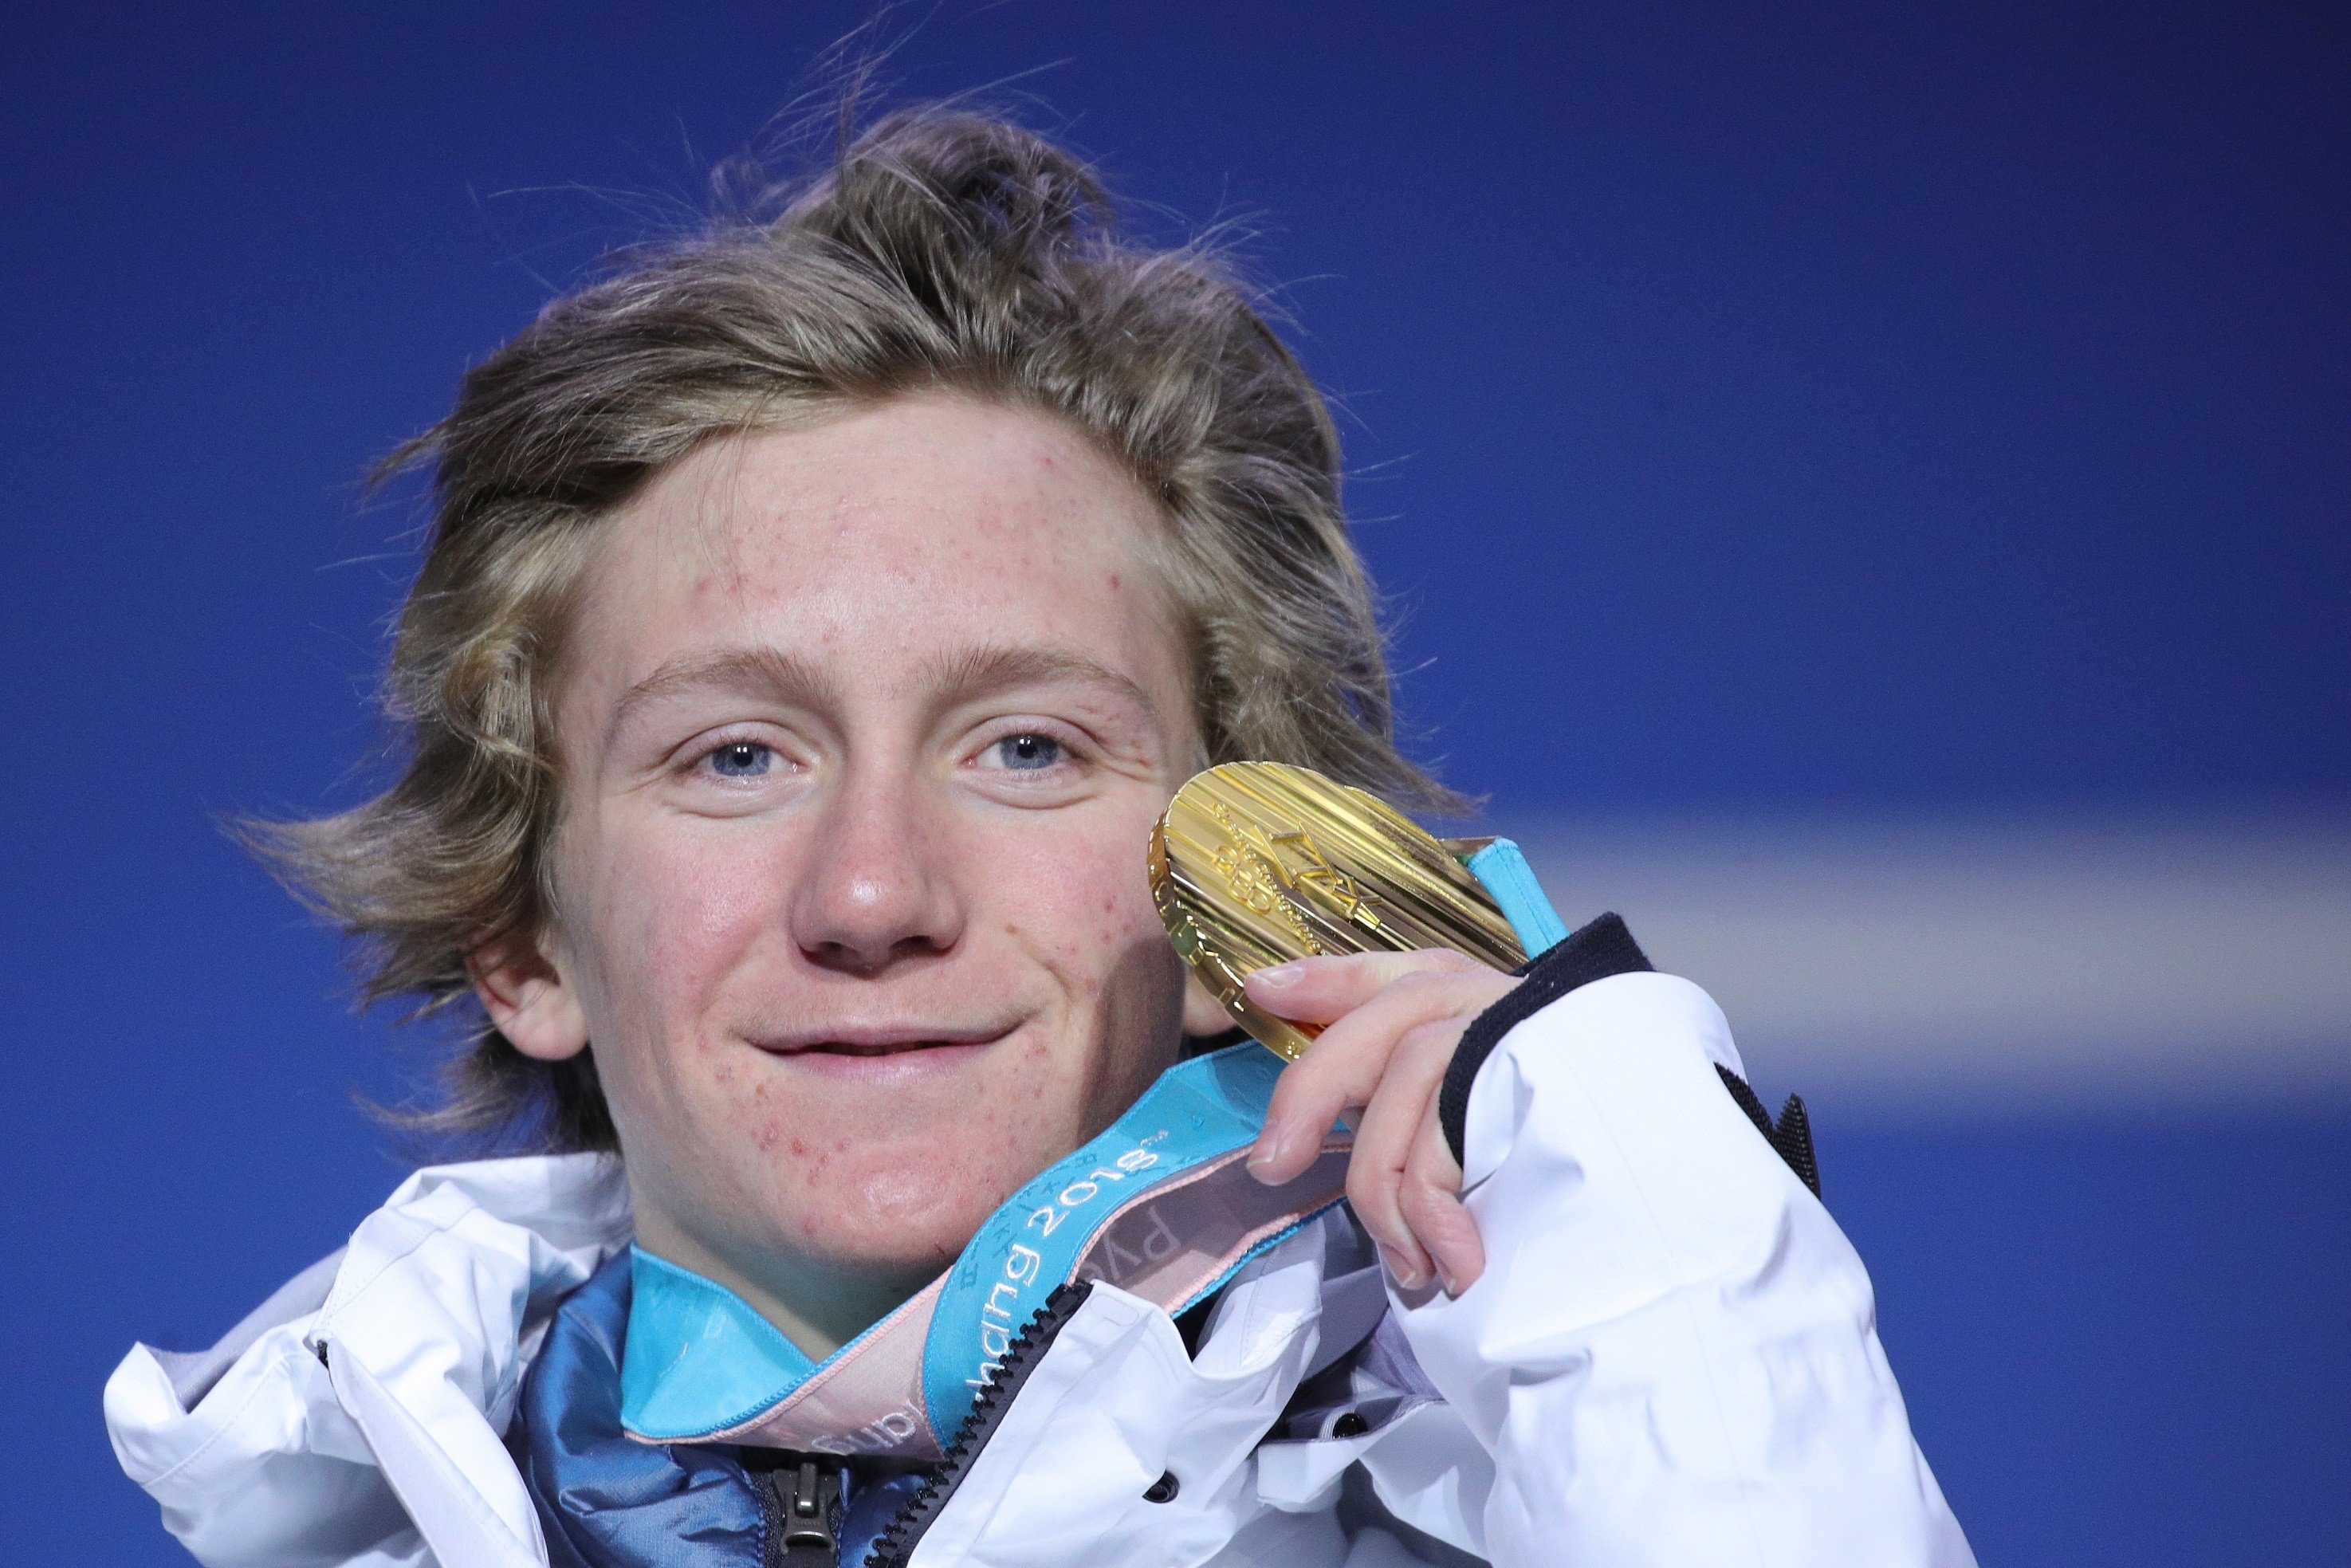 Gold medalist Redmond Gerard of the United States poses on the podium